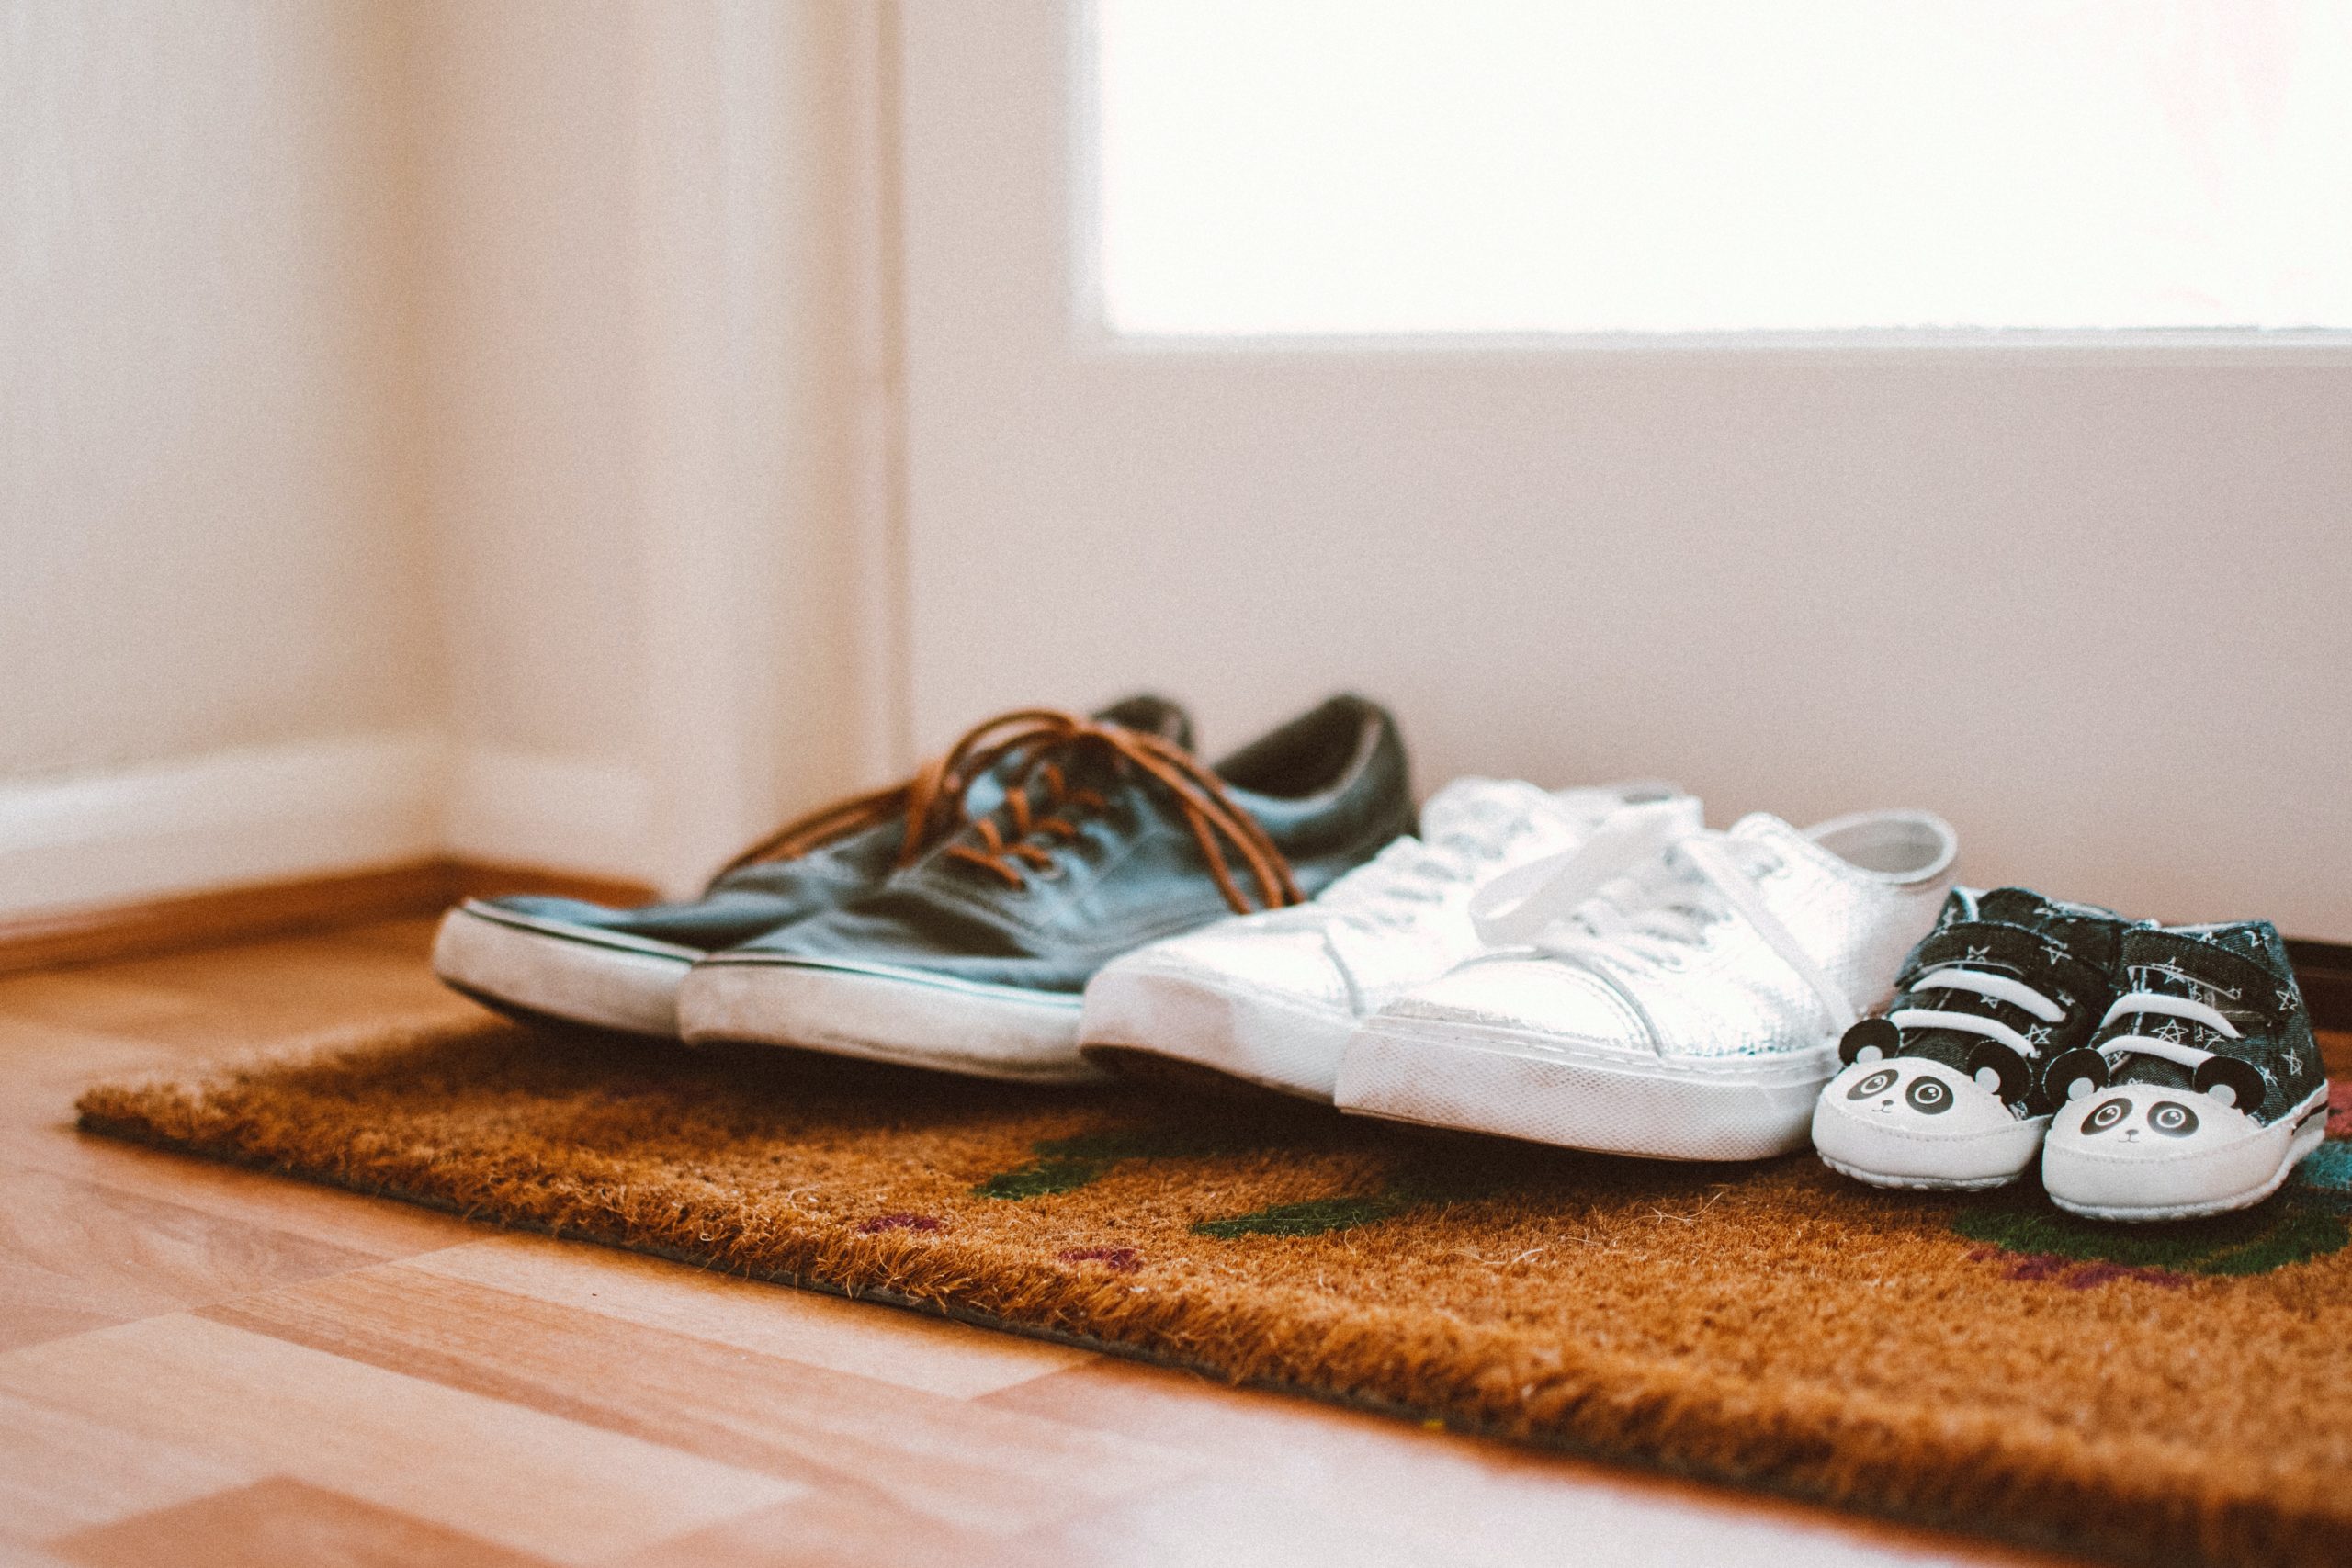 Pairs of shoes representing parenting time during a divorce